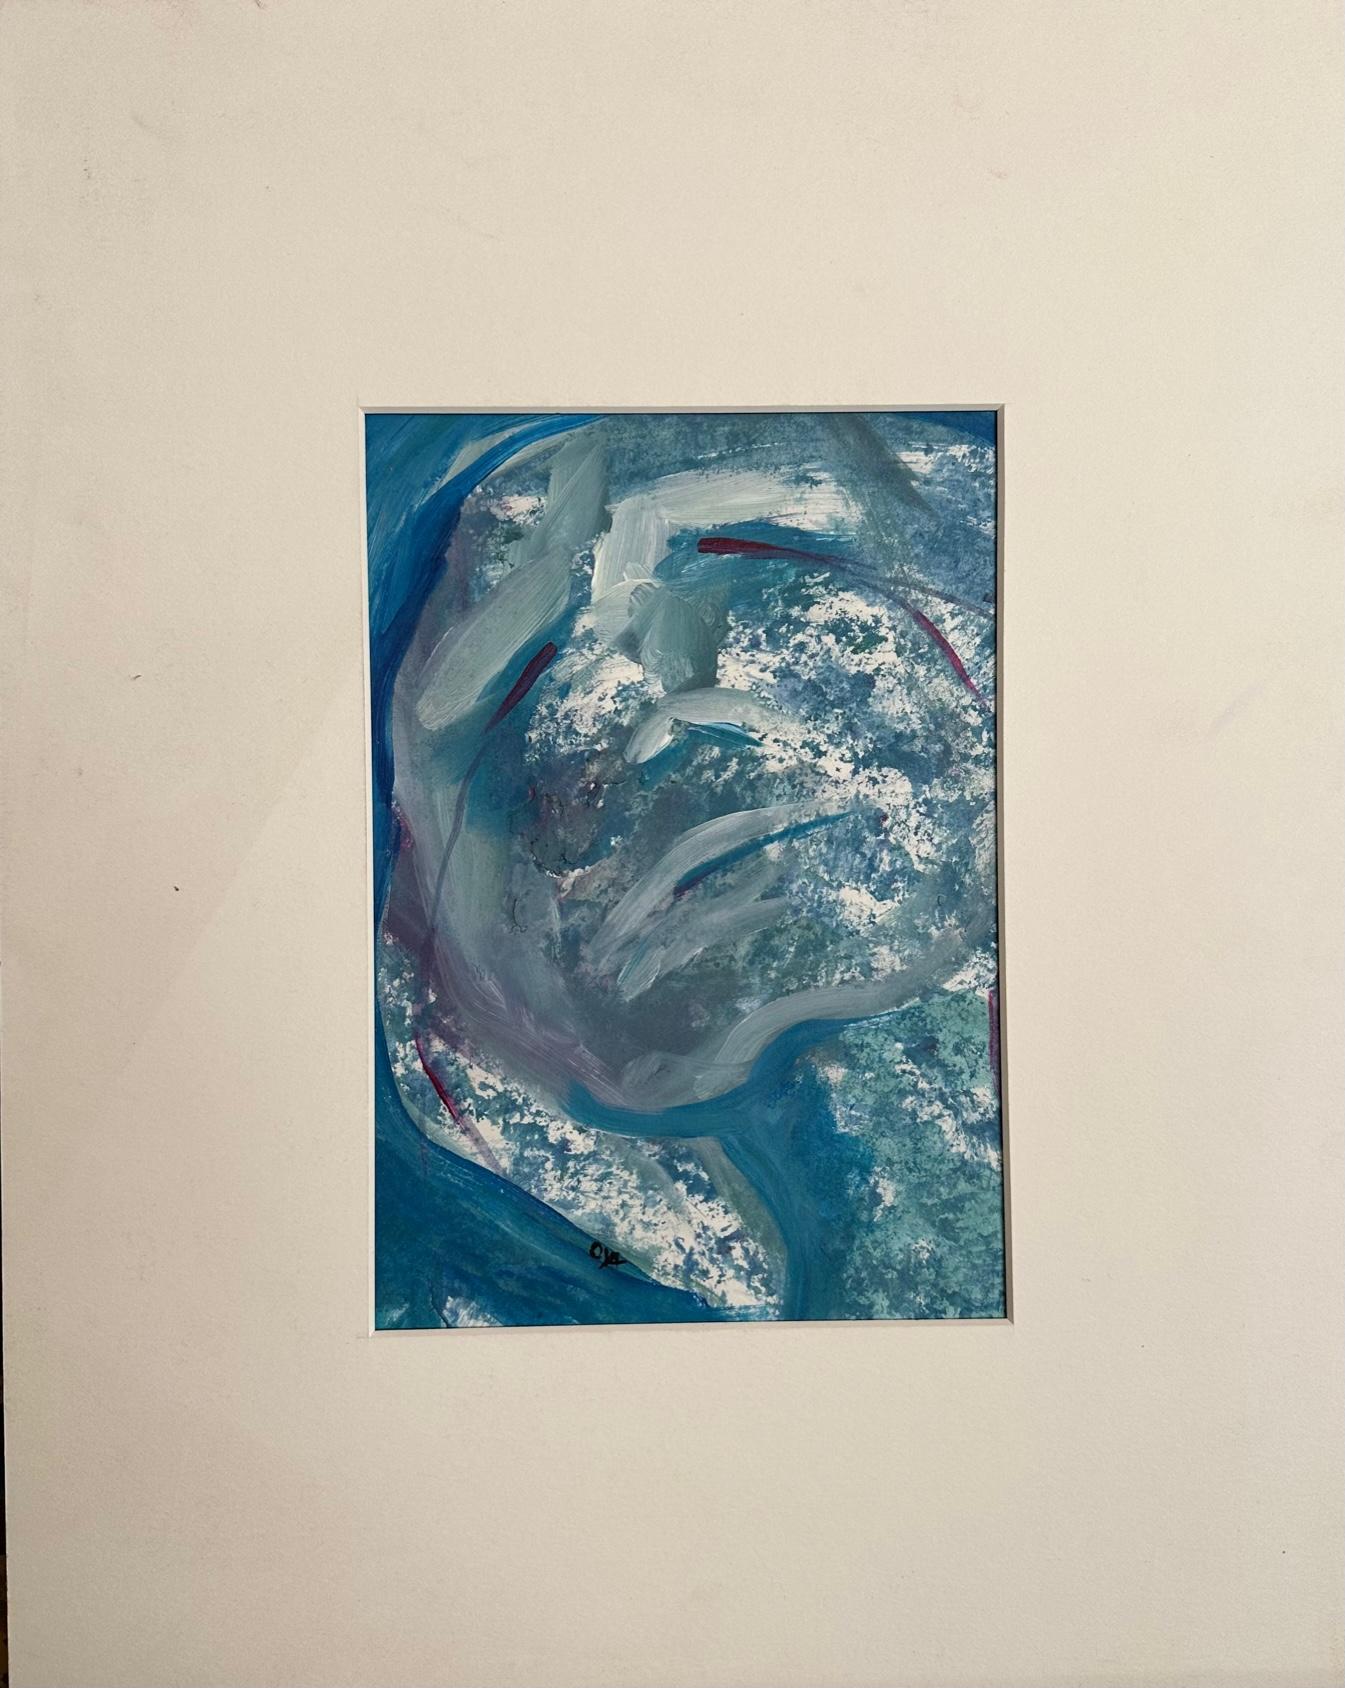 Oya Bolgun is a visionary artist whose dynamic and ever-evolving abstract style captures the imagination and inspires the senses. Drawing on her deep passion for self-expression and her desire to connect with her audience, Oya creates works that are